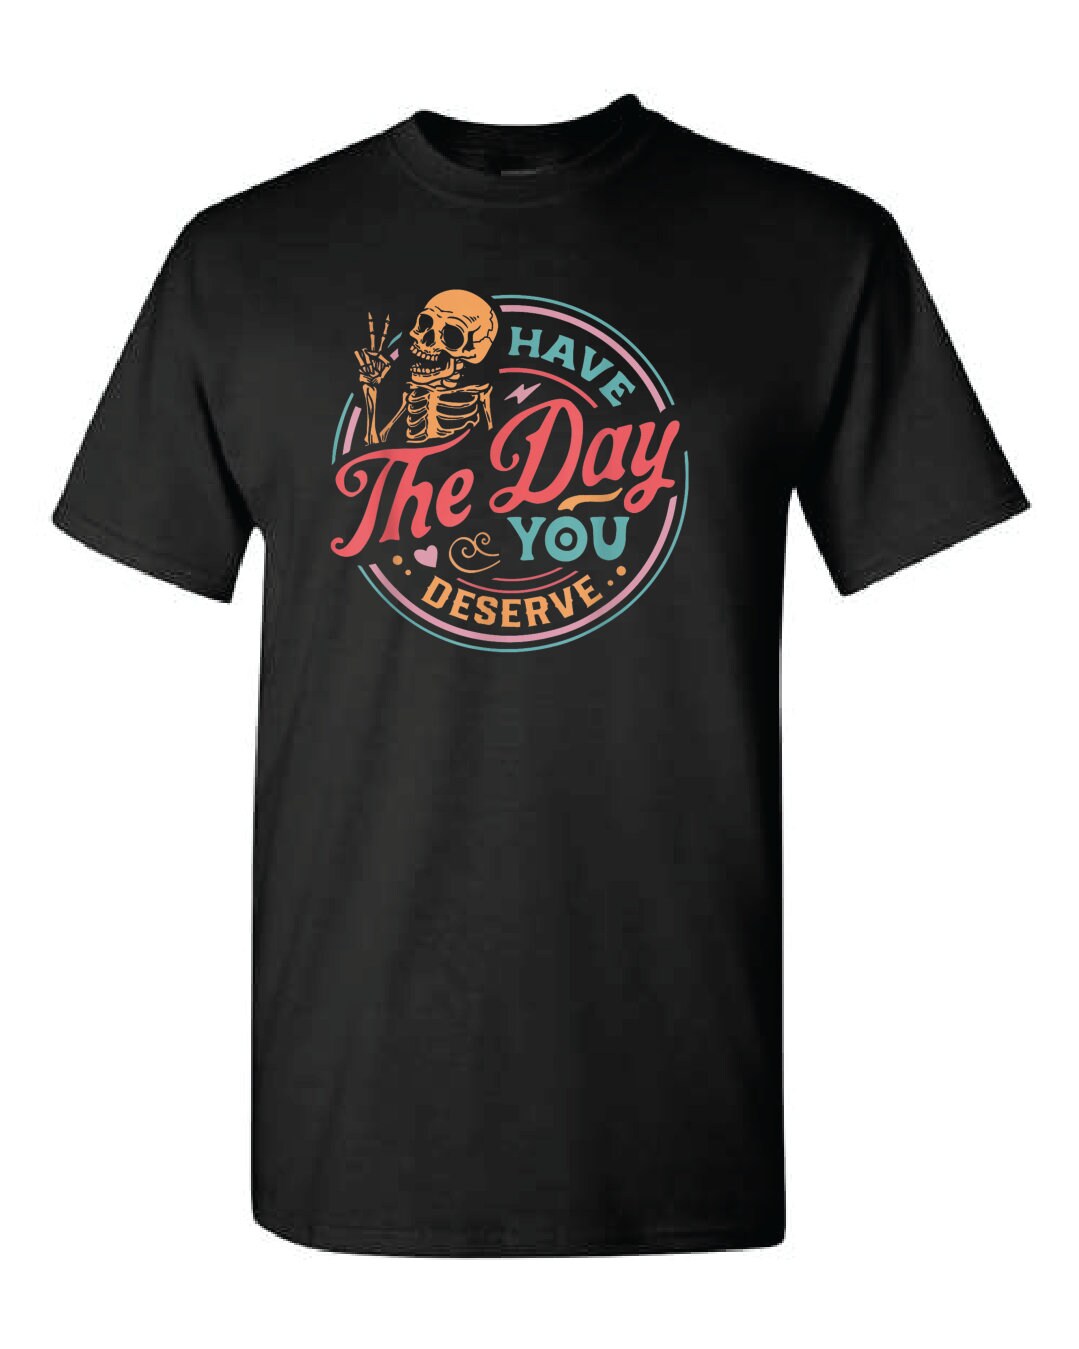 Have The Day You Deserve T-shirt, Kindness Gift, Sarcastic Shirts,Motivational Skeleton TShirt, Inspirational Clothes,Halloween Tee